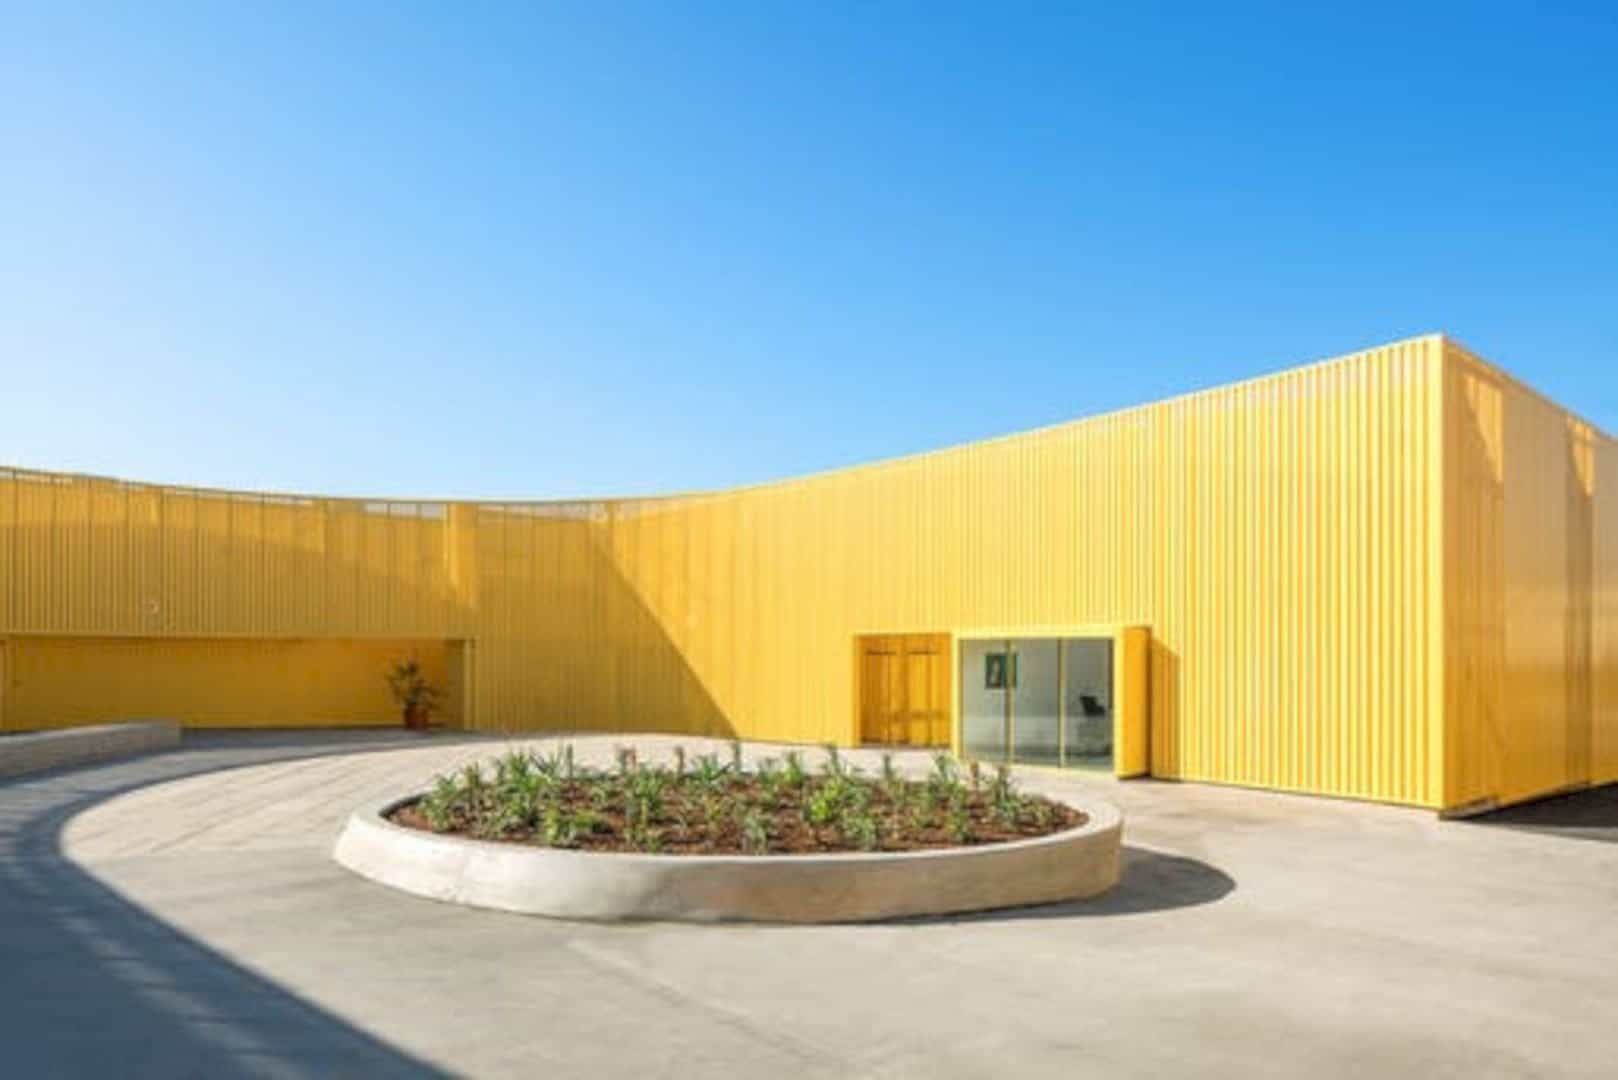 Animo South Los Angeles High School A Bright Yellow Campus Building In Sunny La Atmosphere 8